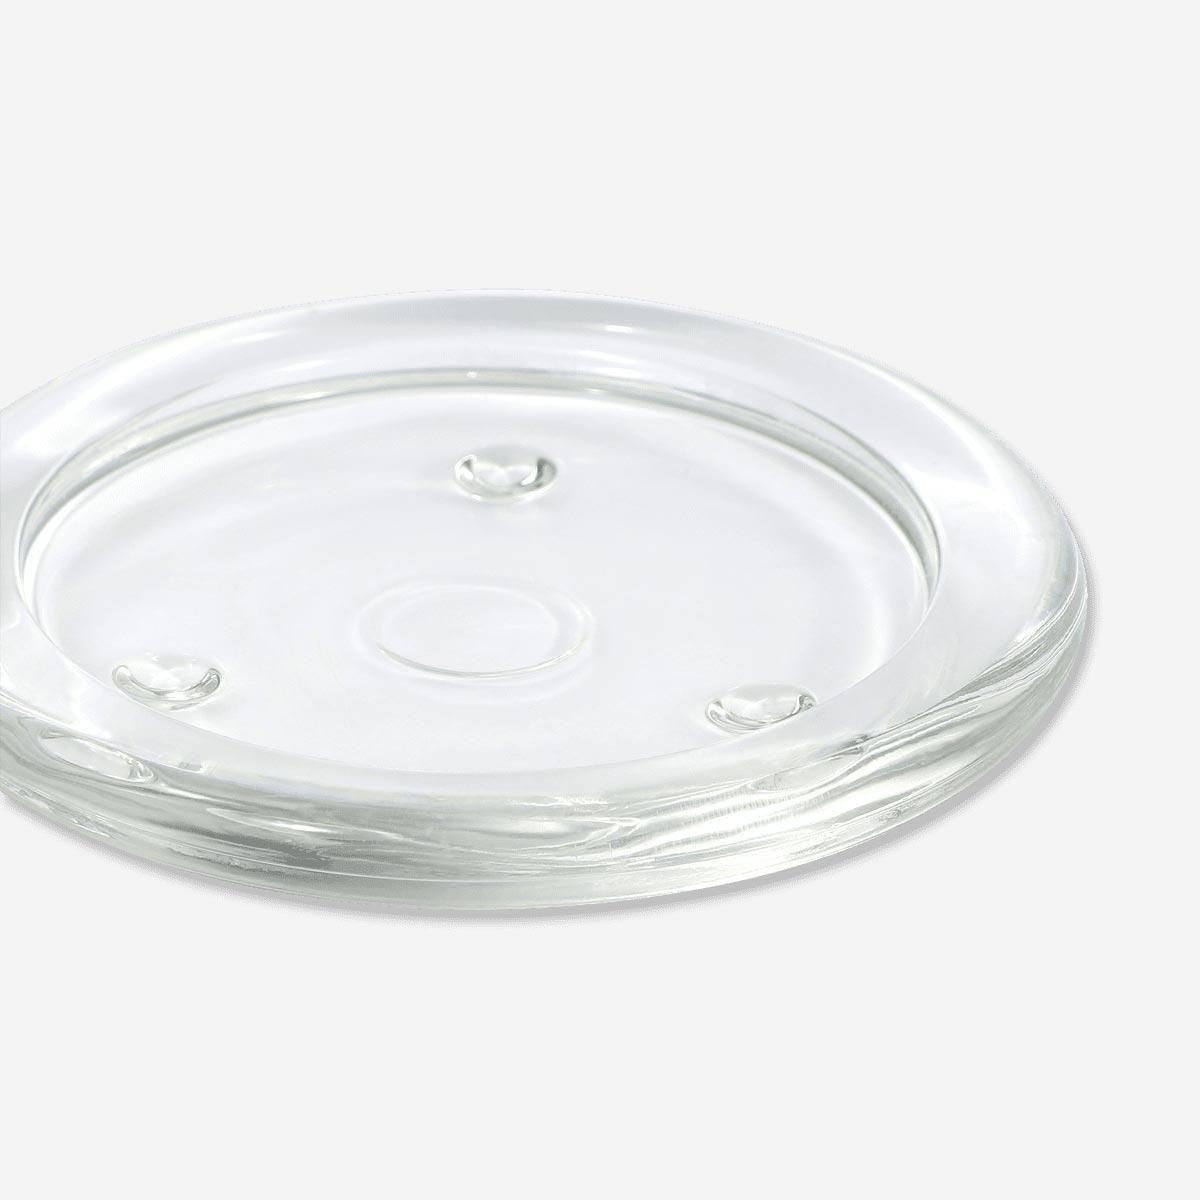 Glass candle holder dish